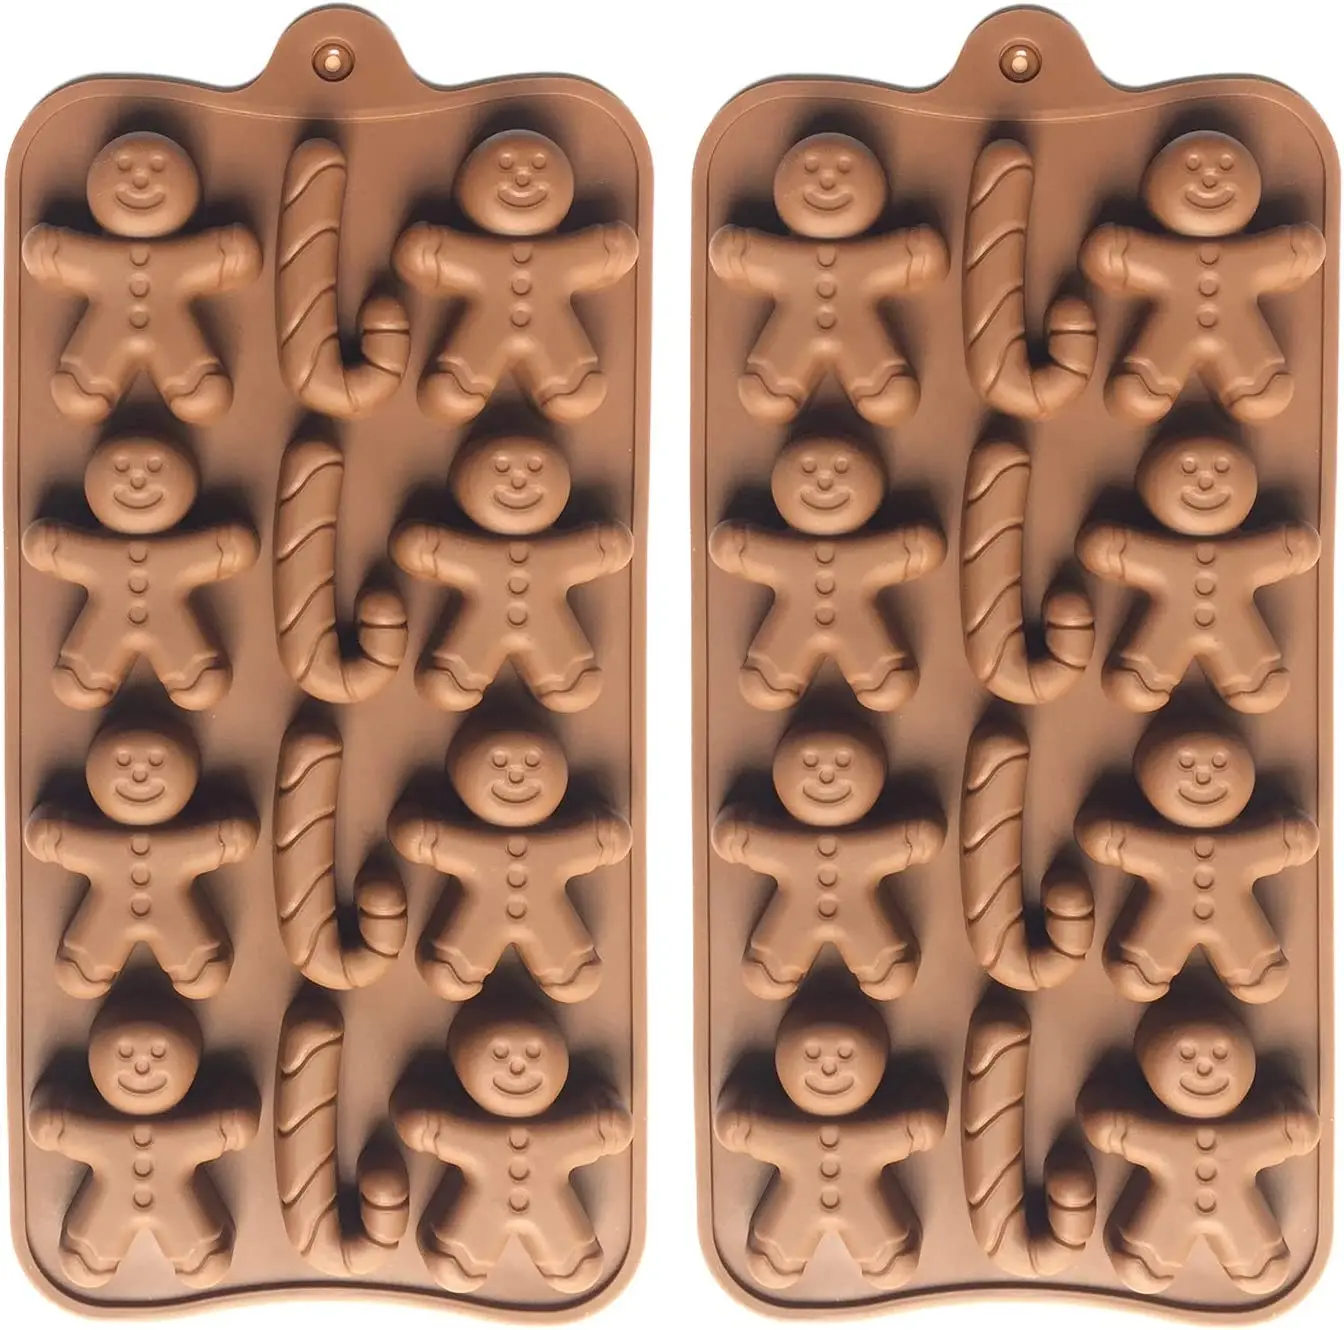 

2pcs Christmas Silicone Molds for Baking Jelly Soap, Candy Cane, Gingerbread Men Chocolate Candy Mold